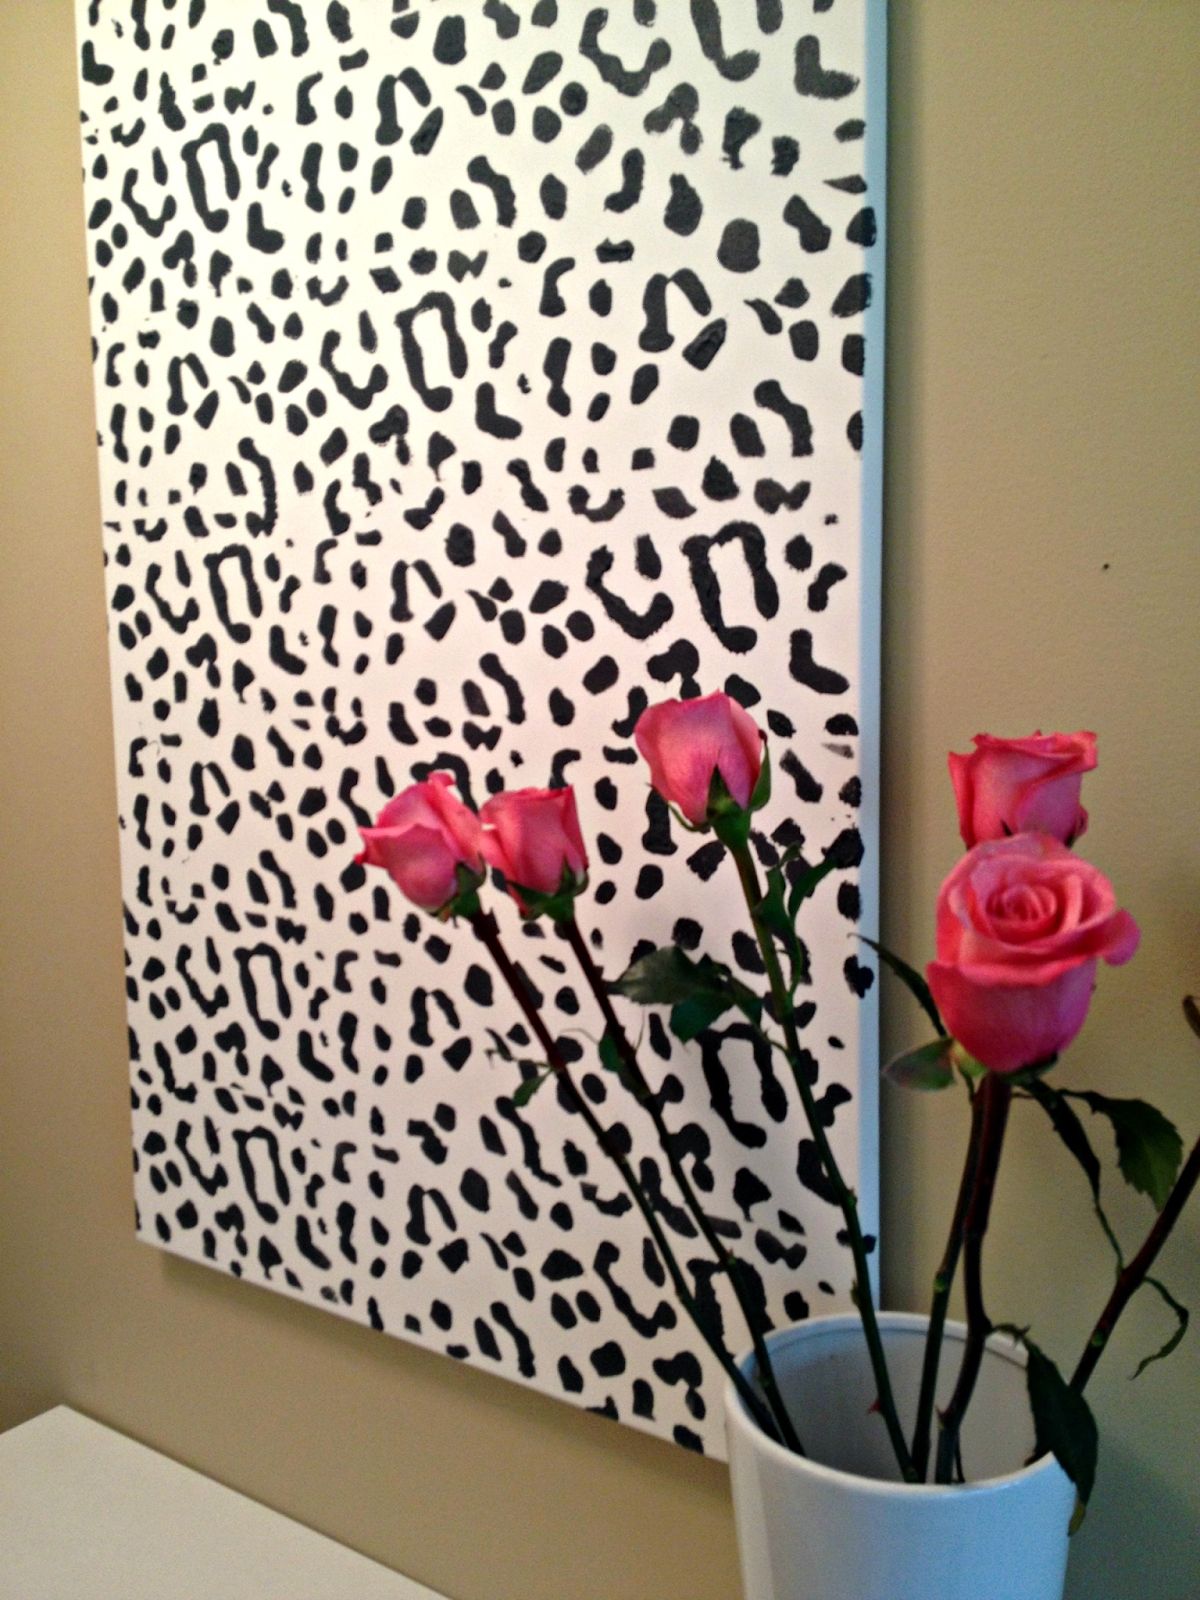 Leopard Print Wall Art For Best And Newest Behind The Big Green Door: Diy Leopard Print Wall Art (View 1 of 15)